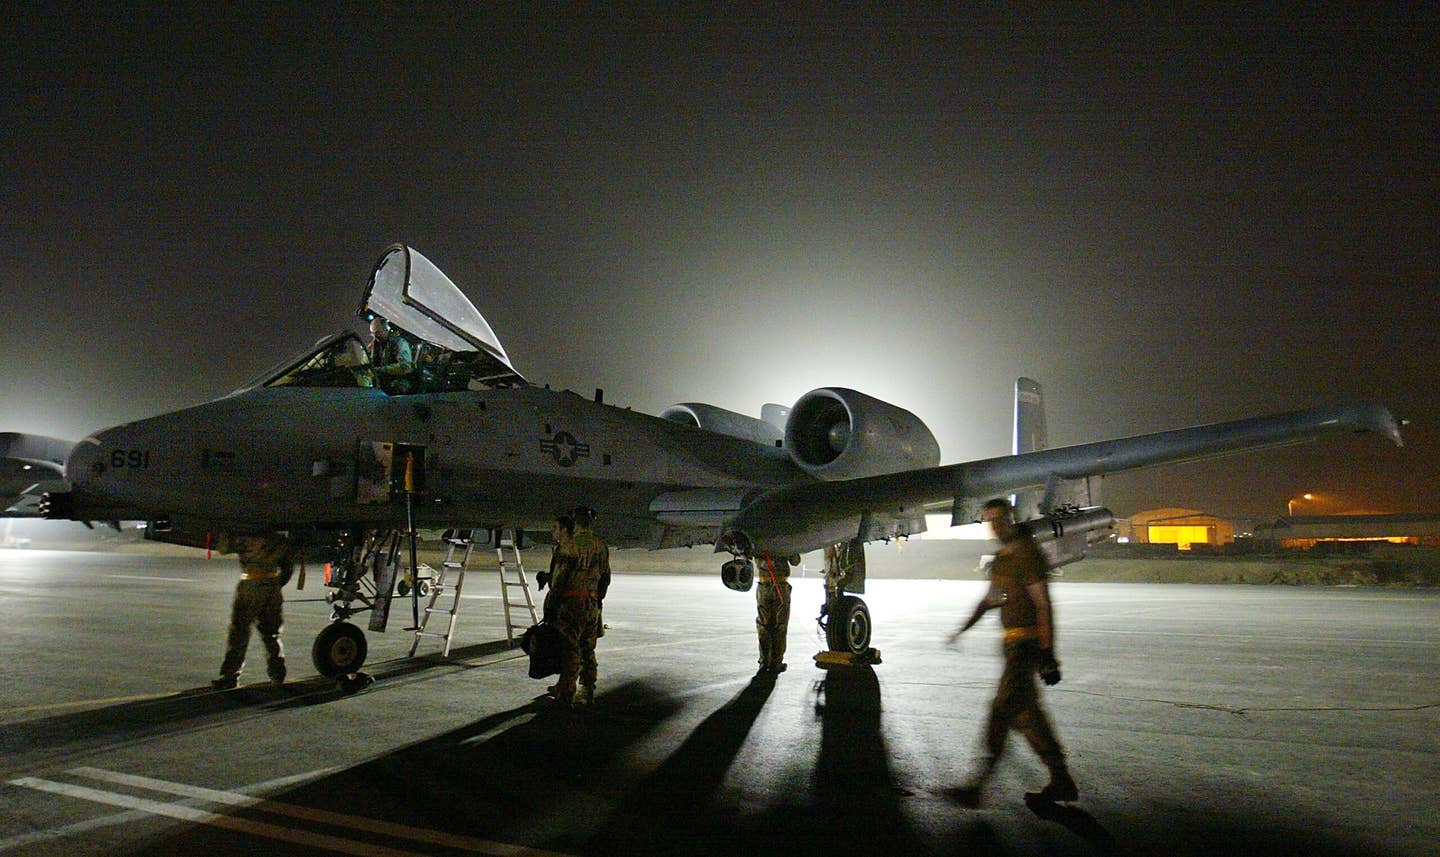 Air Force maintenance personnel go through pre-flight checks on an A-10 as work goes on through the night of March 19, 2003, at an airbase in the Persian Gulf. <em>Photo by Paula Bronstein/Getty Images</em>